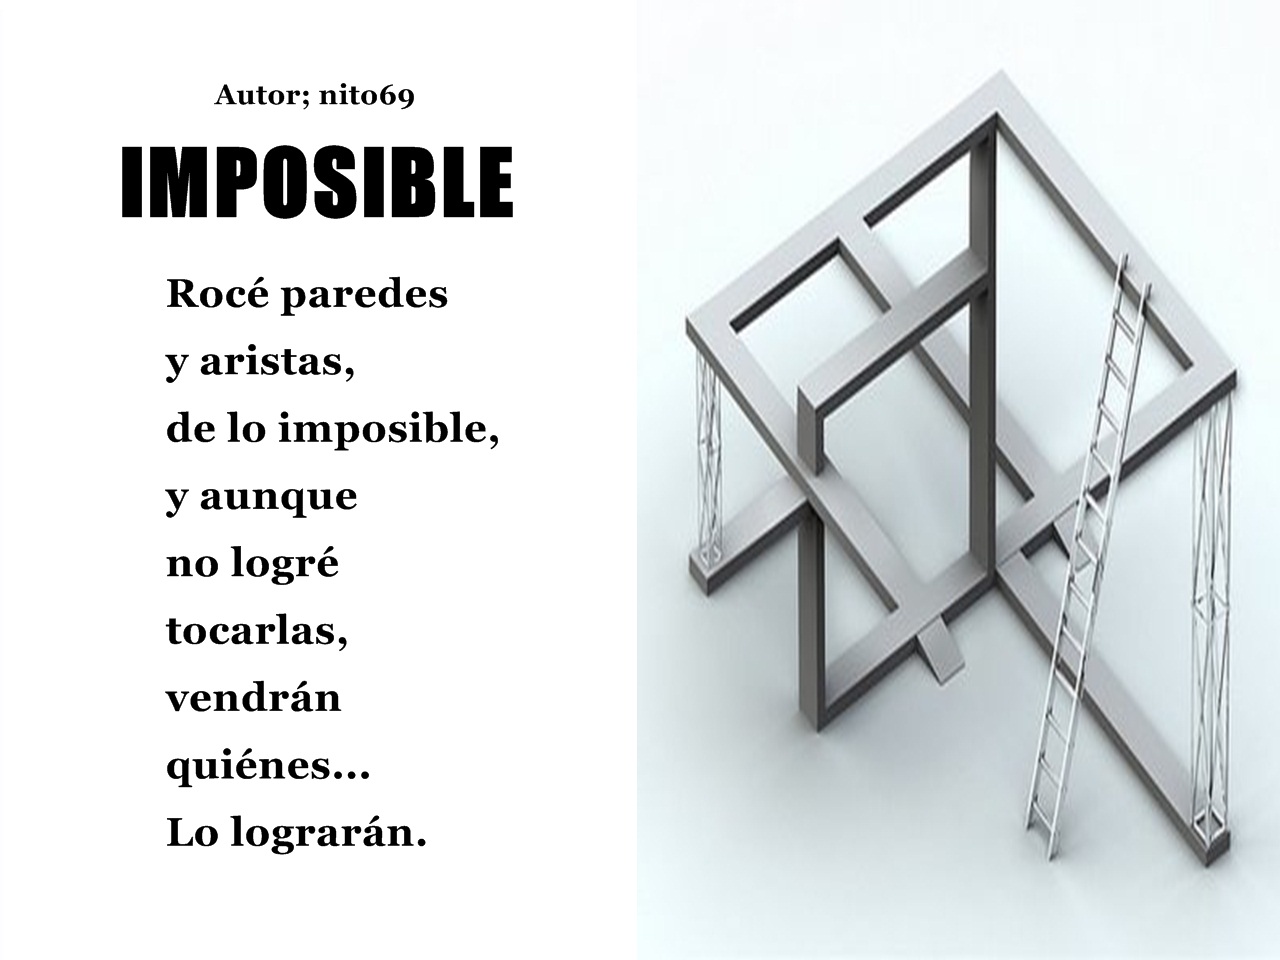 IMPOSIBLE